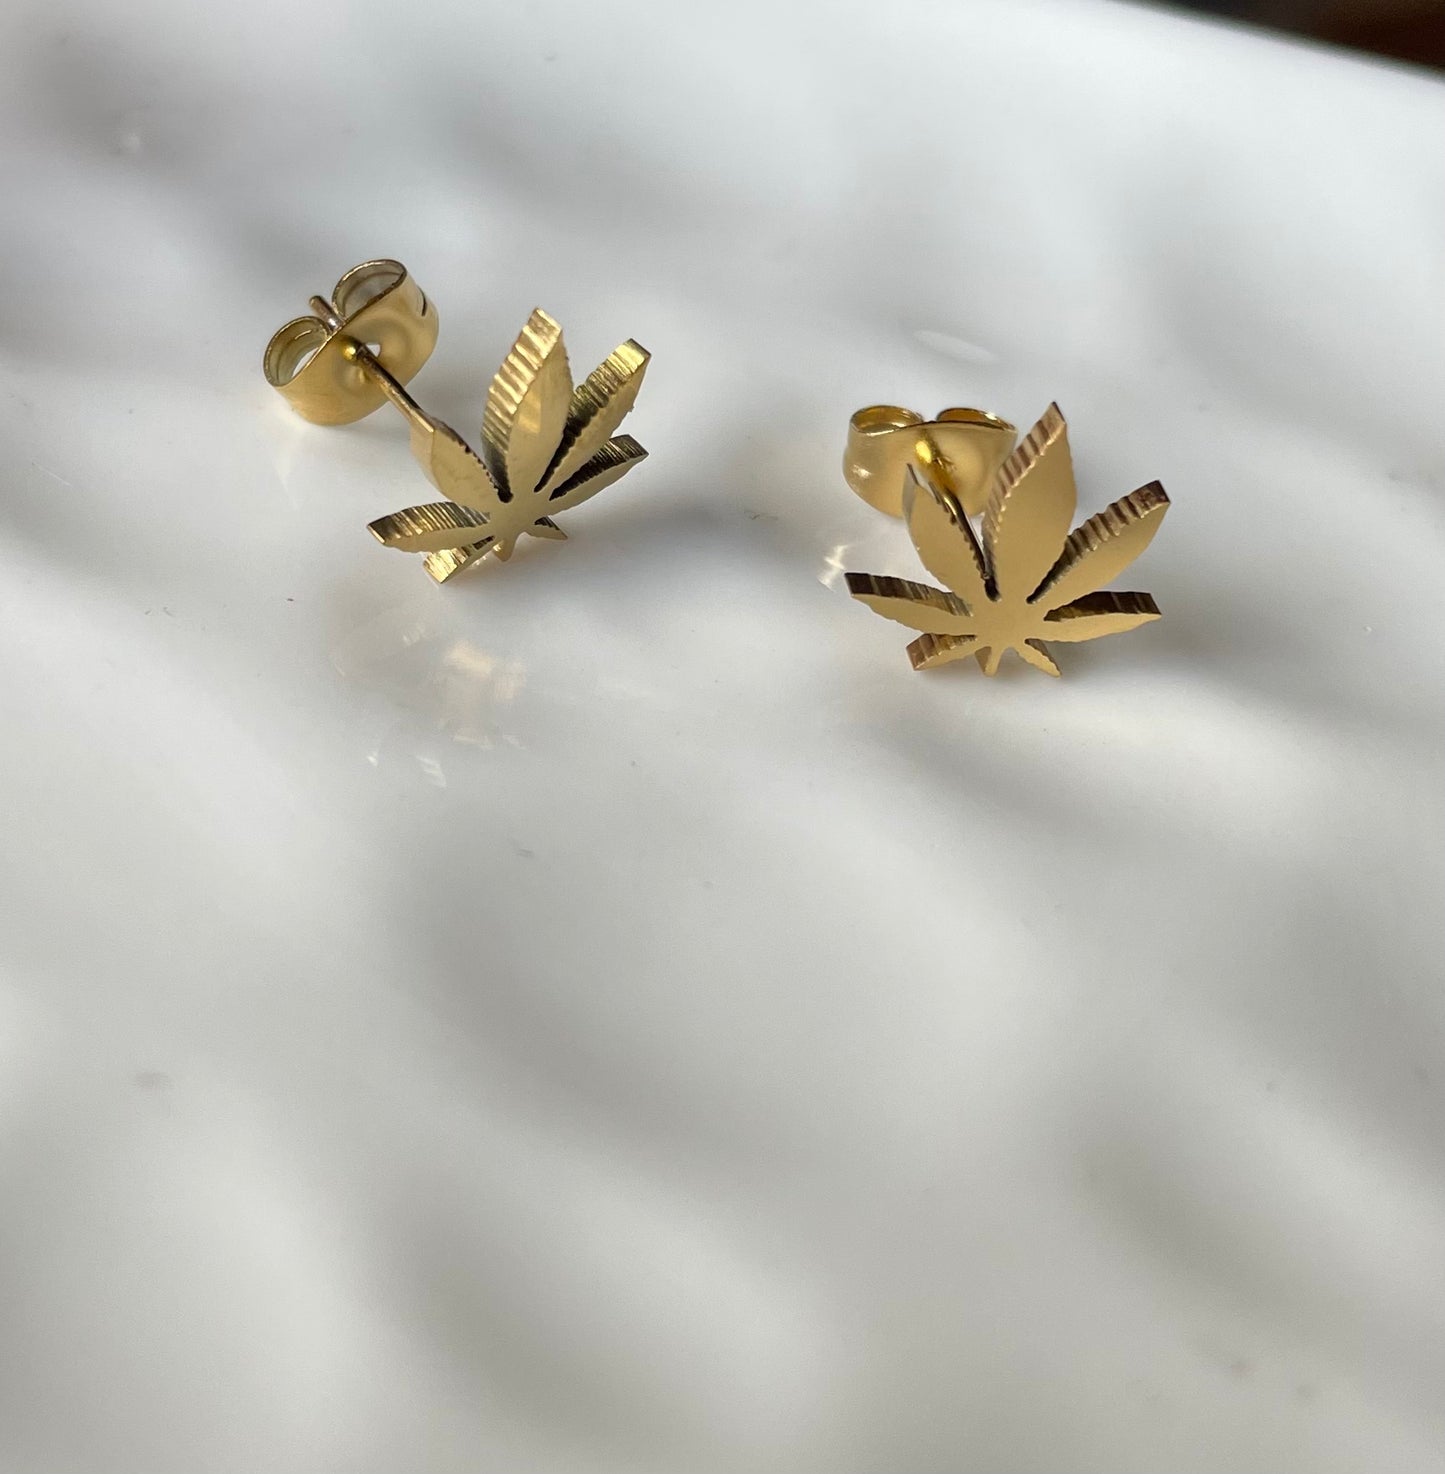 The Queen of Weed gold stud earrings